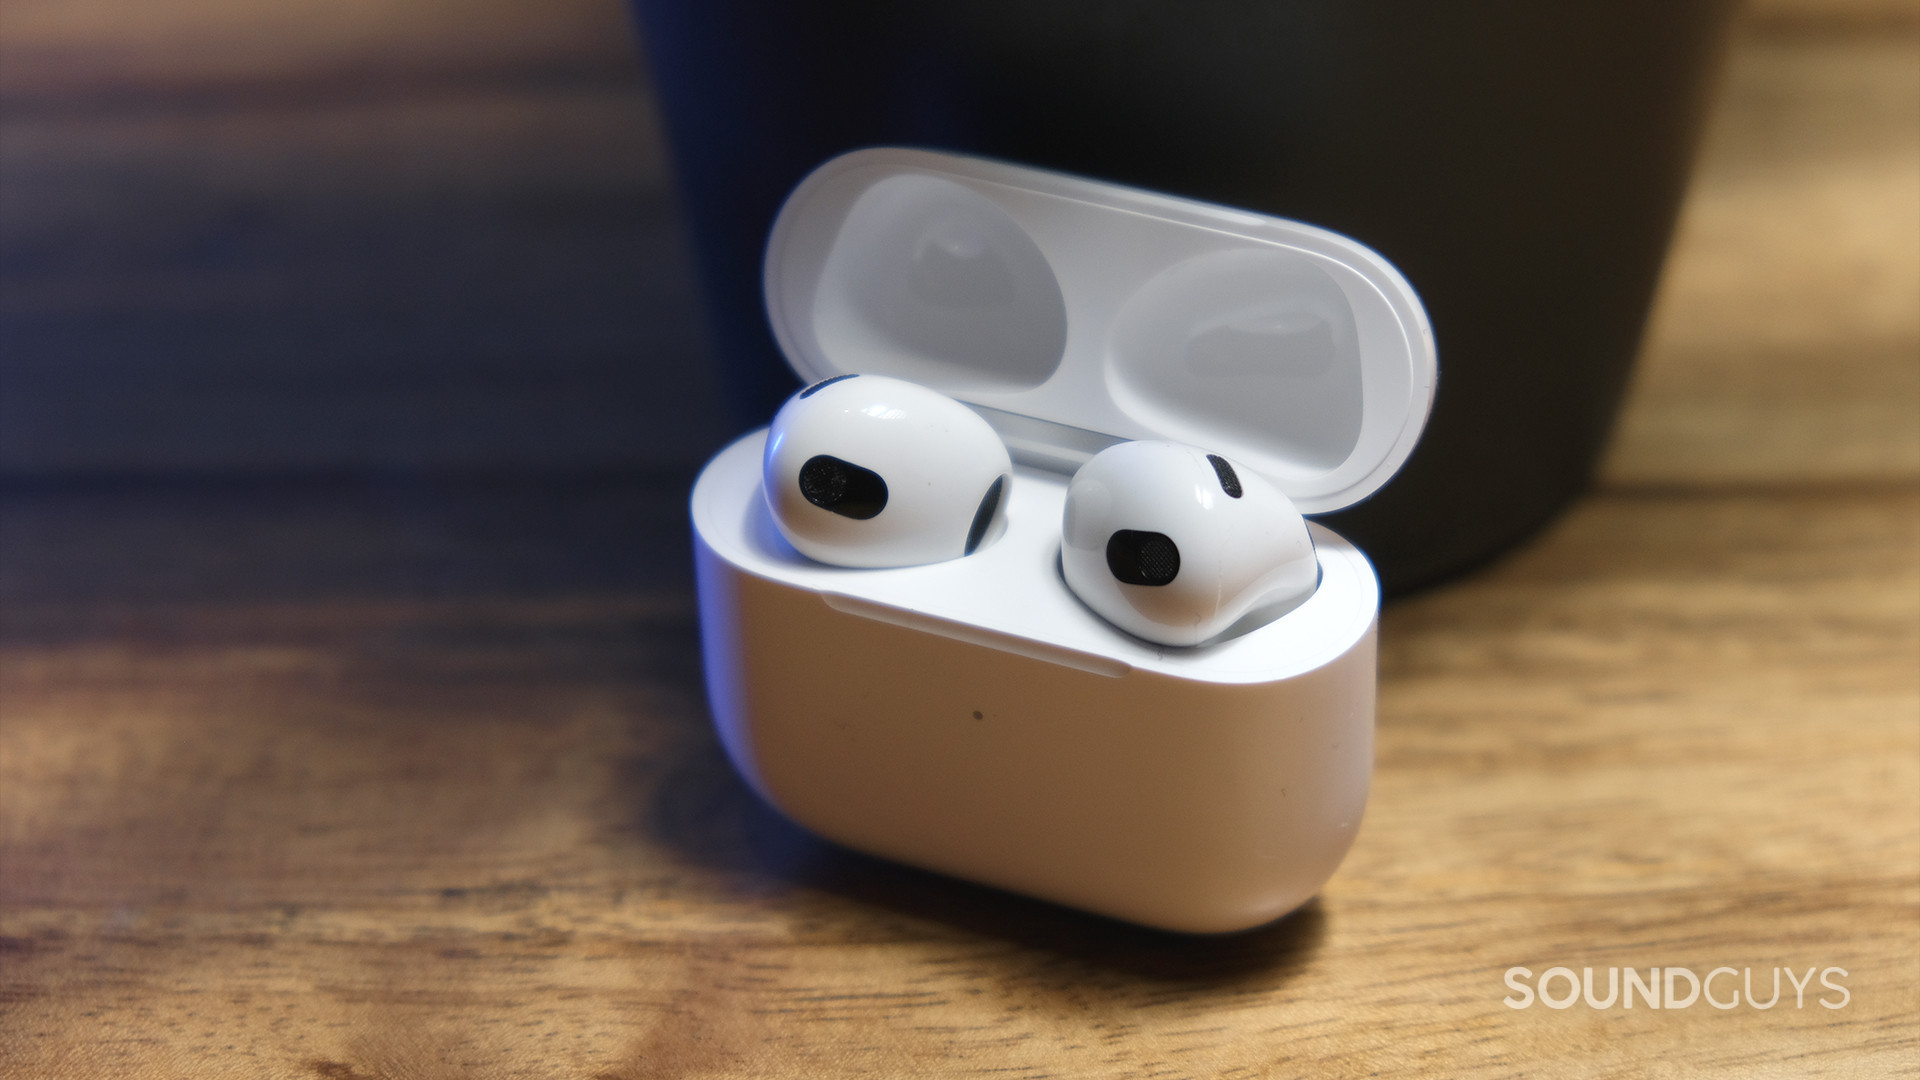 The open case of Apple AirPods (3rd generation) grips the earbuds and rests on a wooden surface.